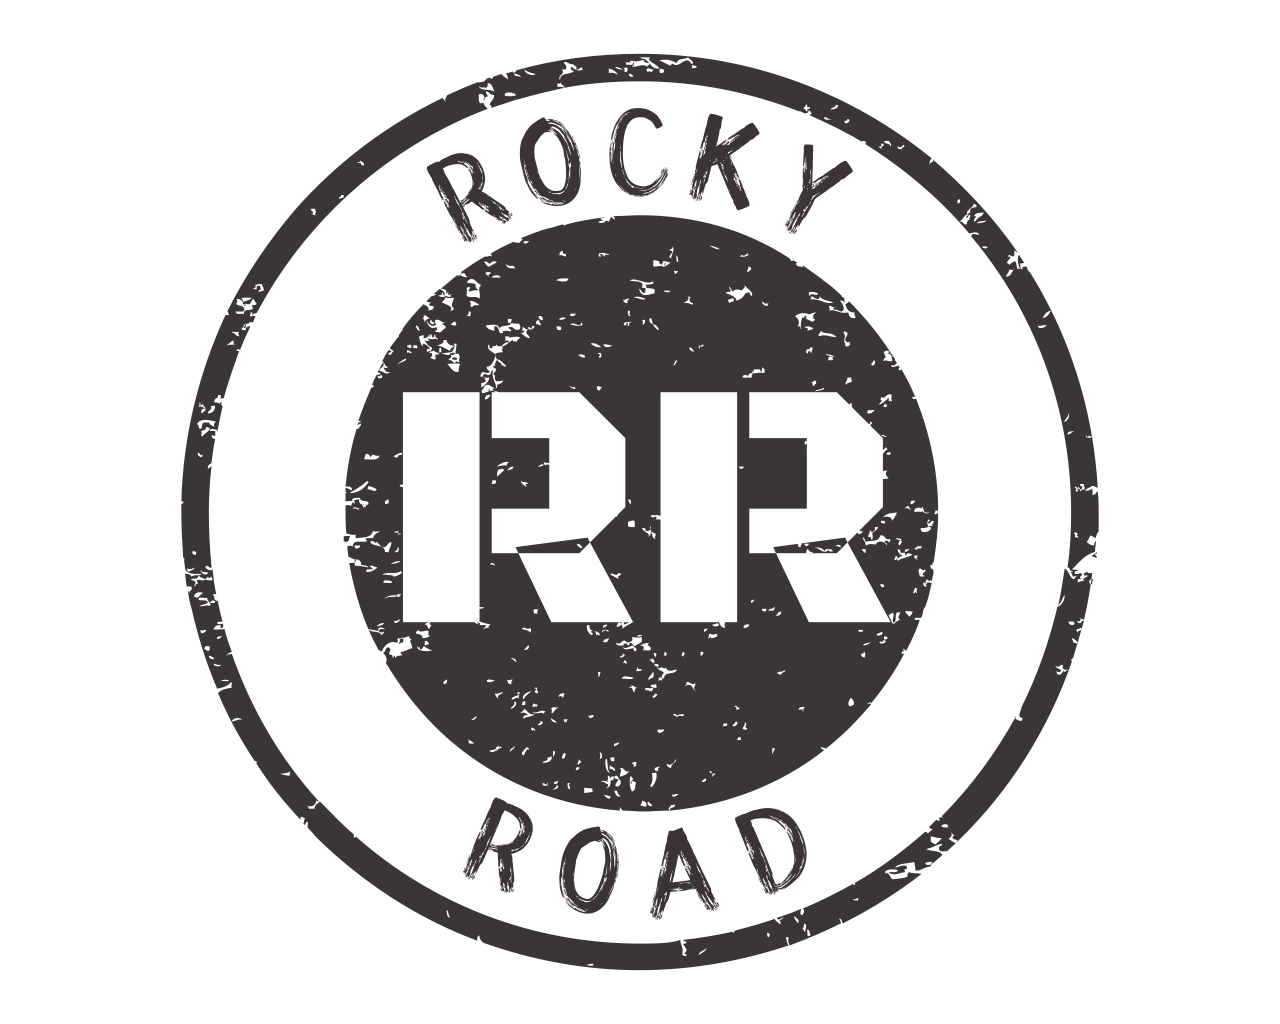 Rocky Road - Cover Band's logo